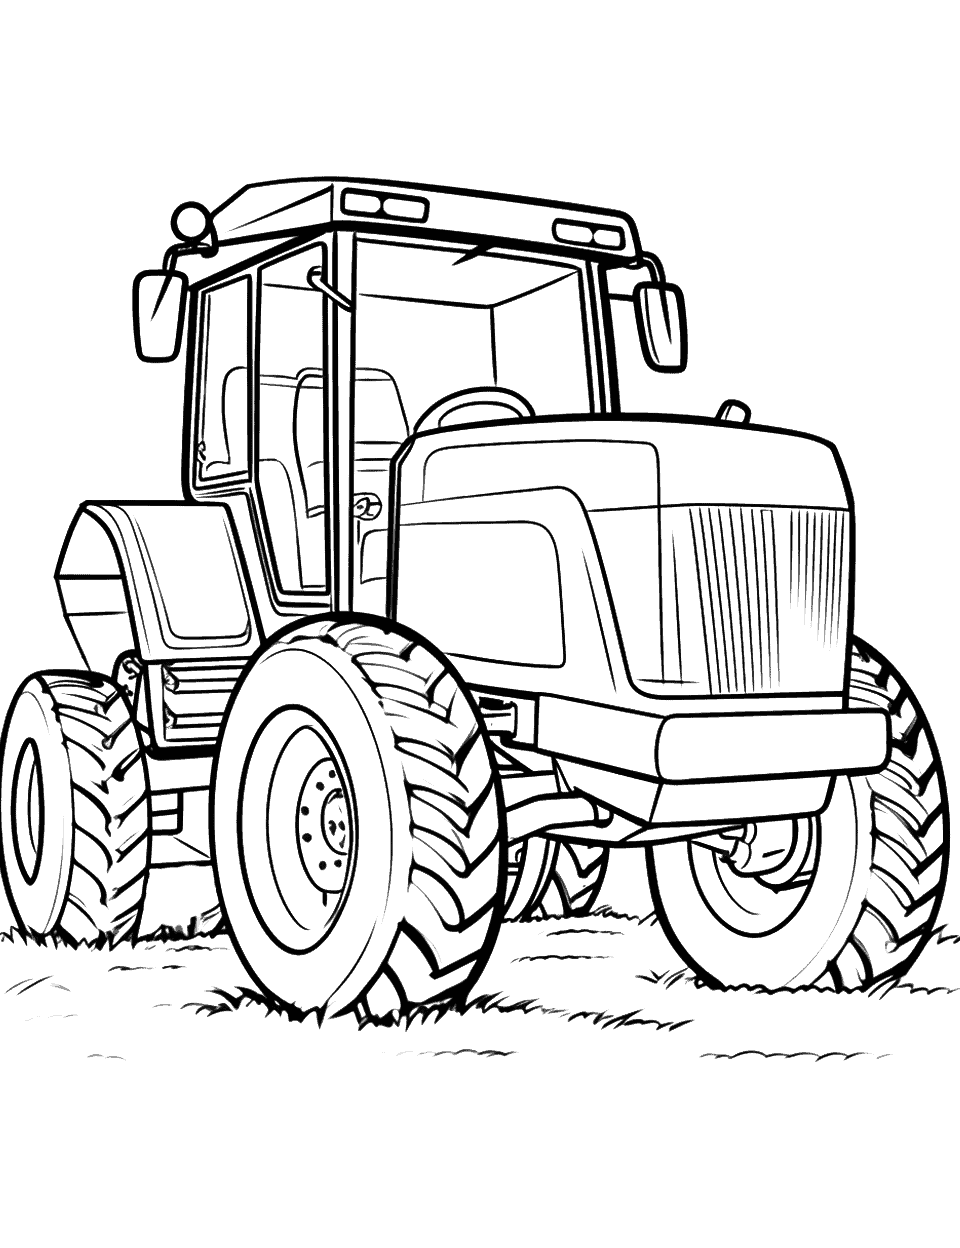 John Deere Tractor Coloring Page - A John Deere designed tractor ready for stellar field works.